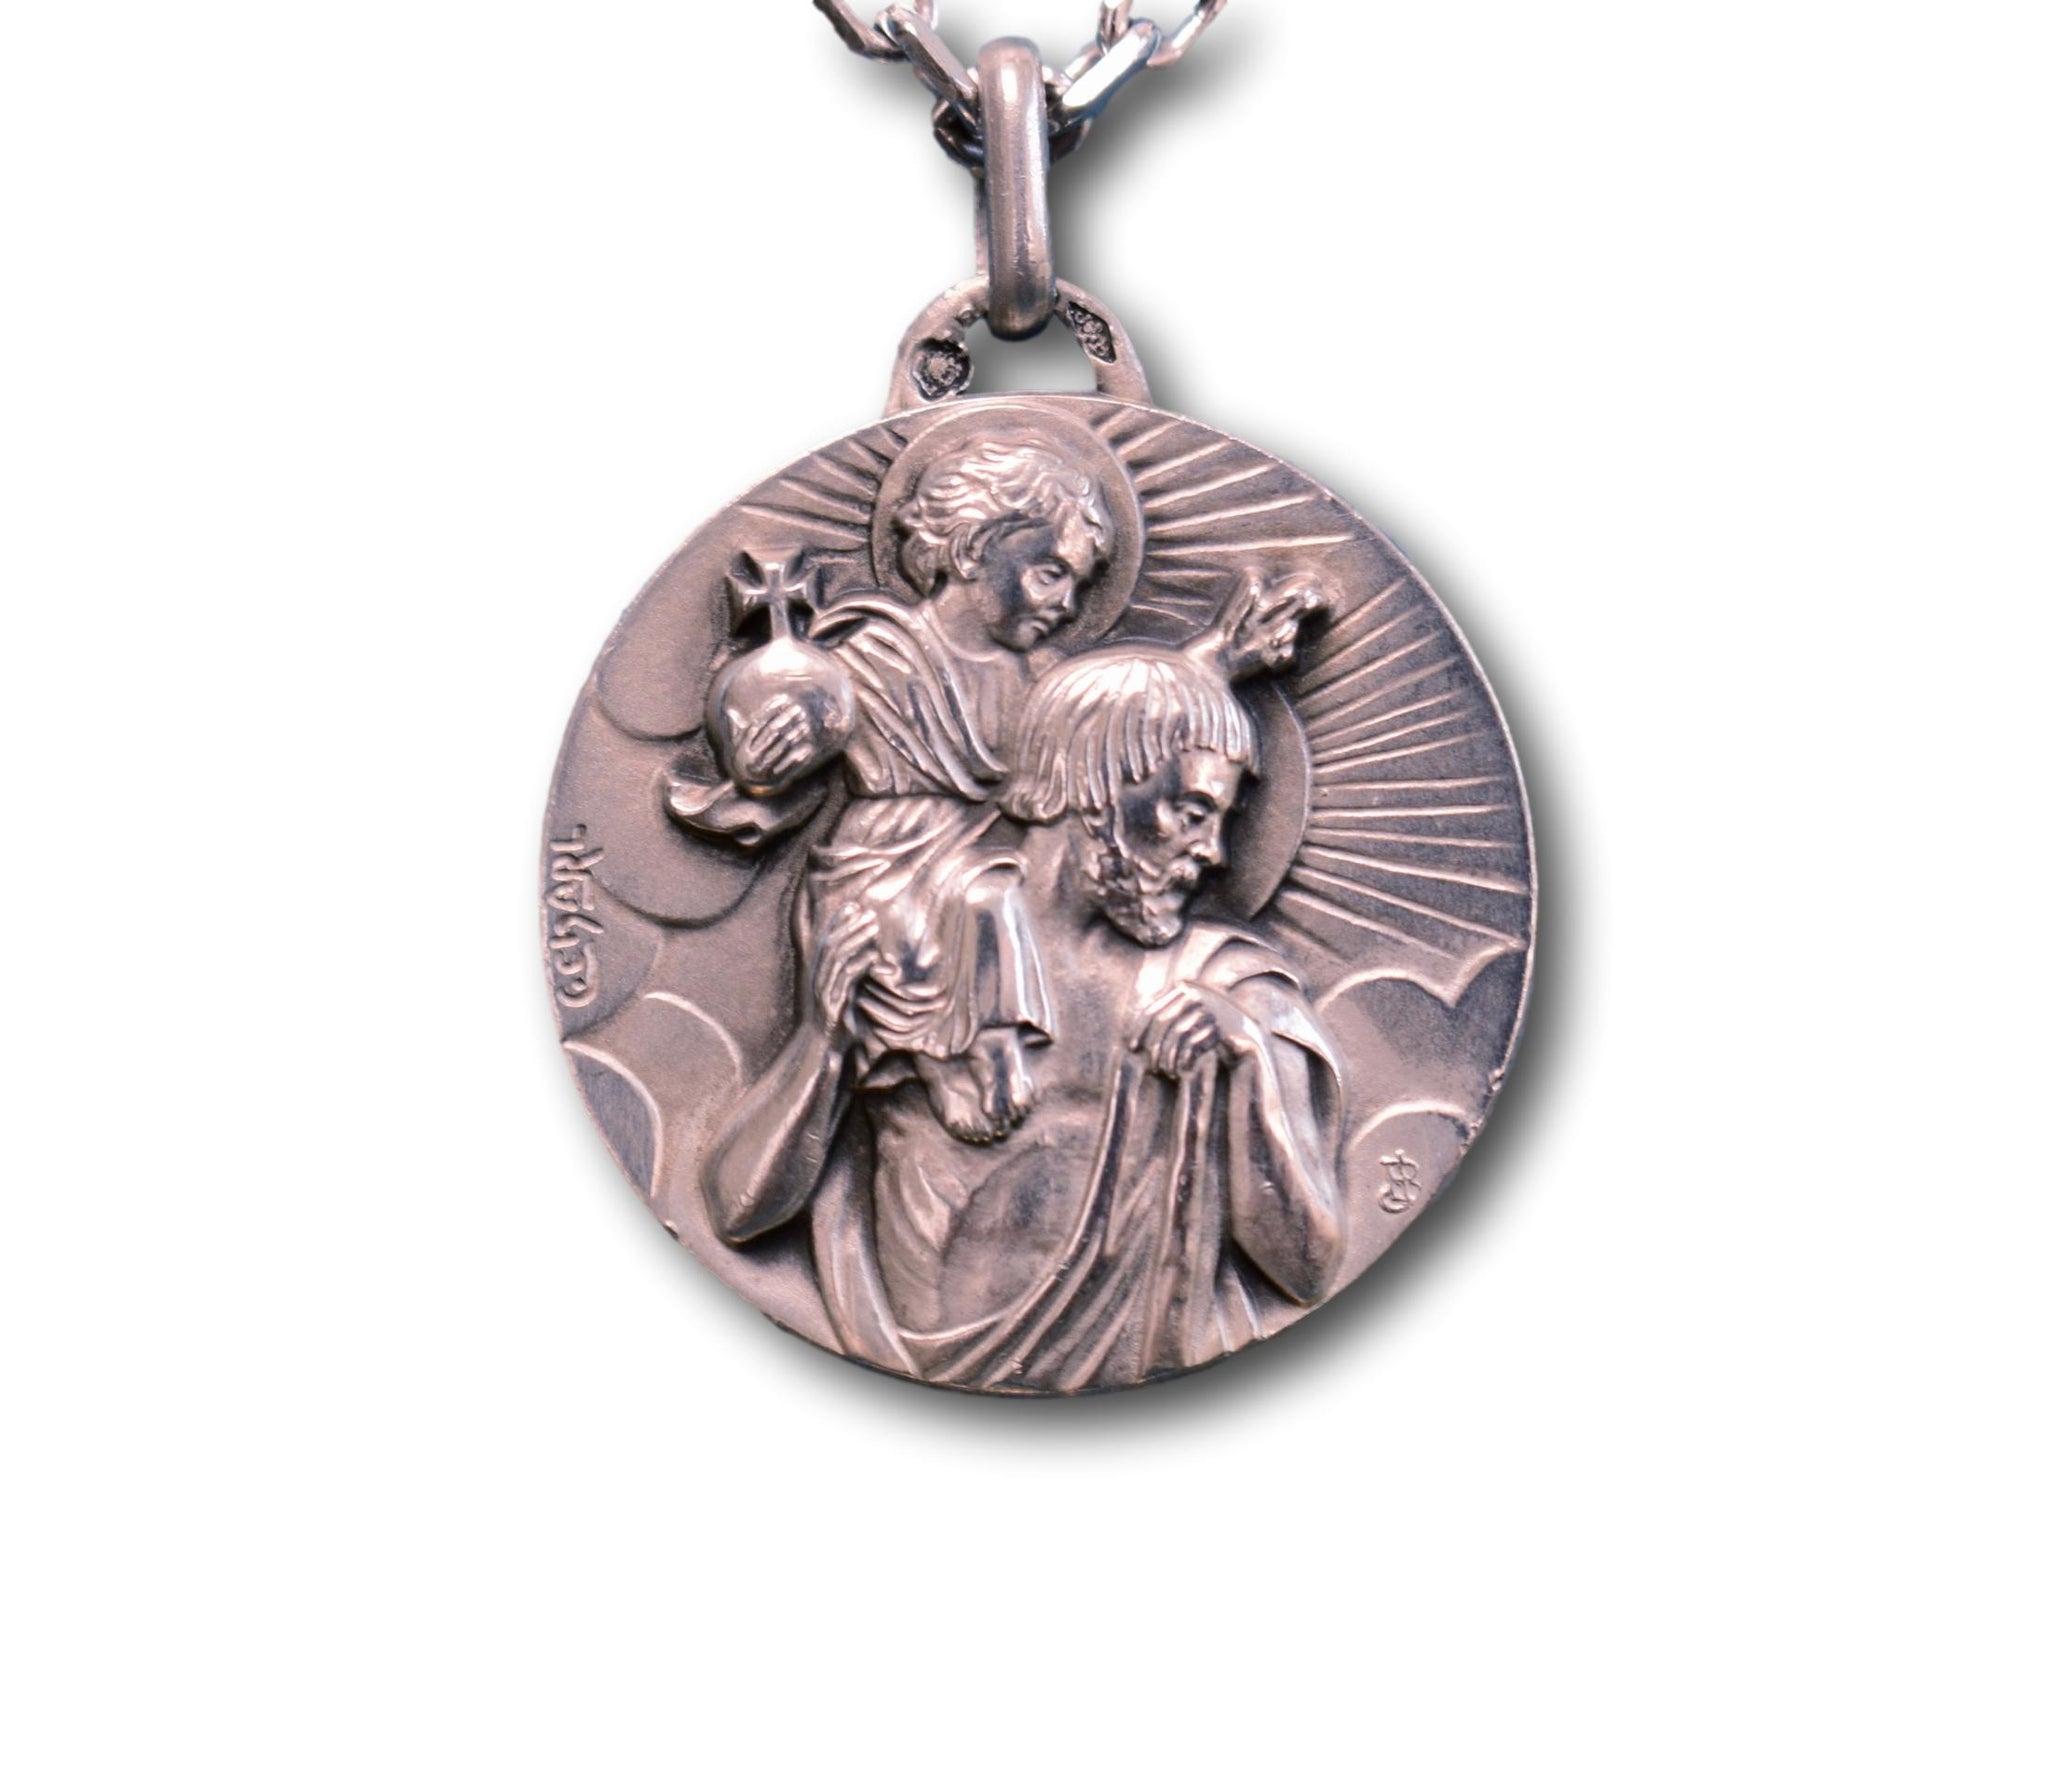 Saint Christopher Sterling Silver Medal, Religious Pendant, Necklace for Men by C Charl